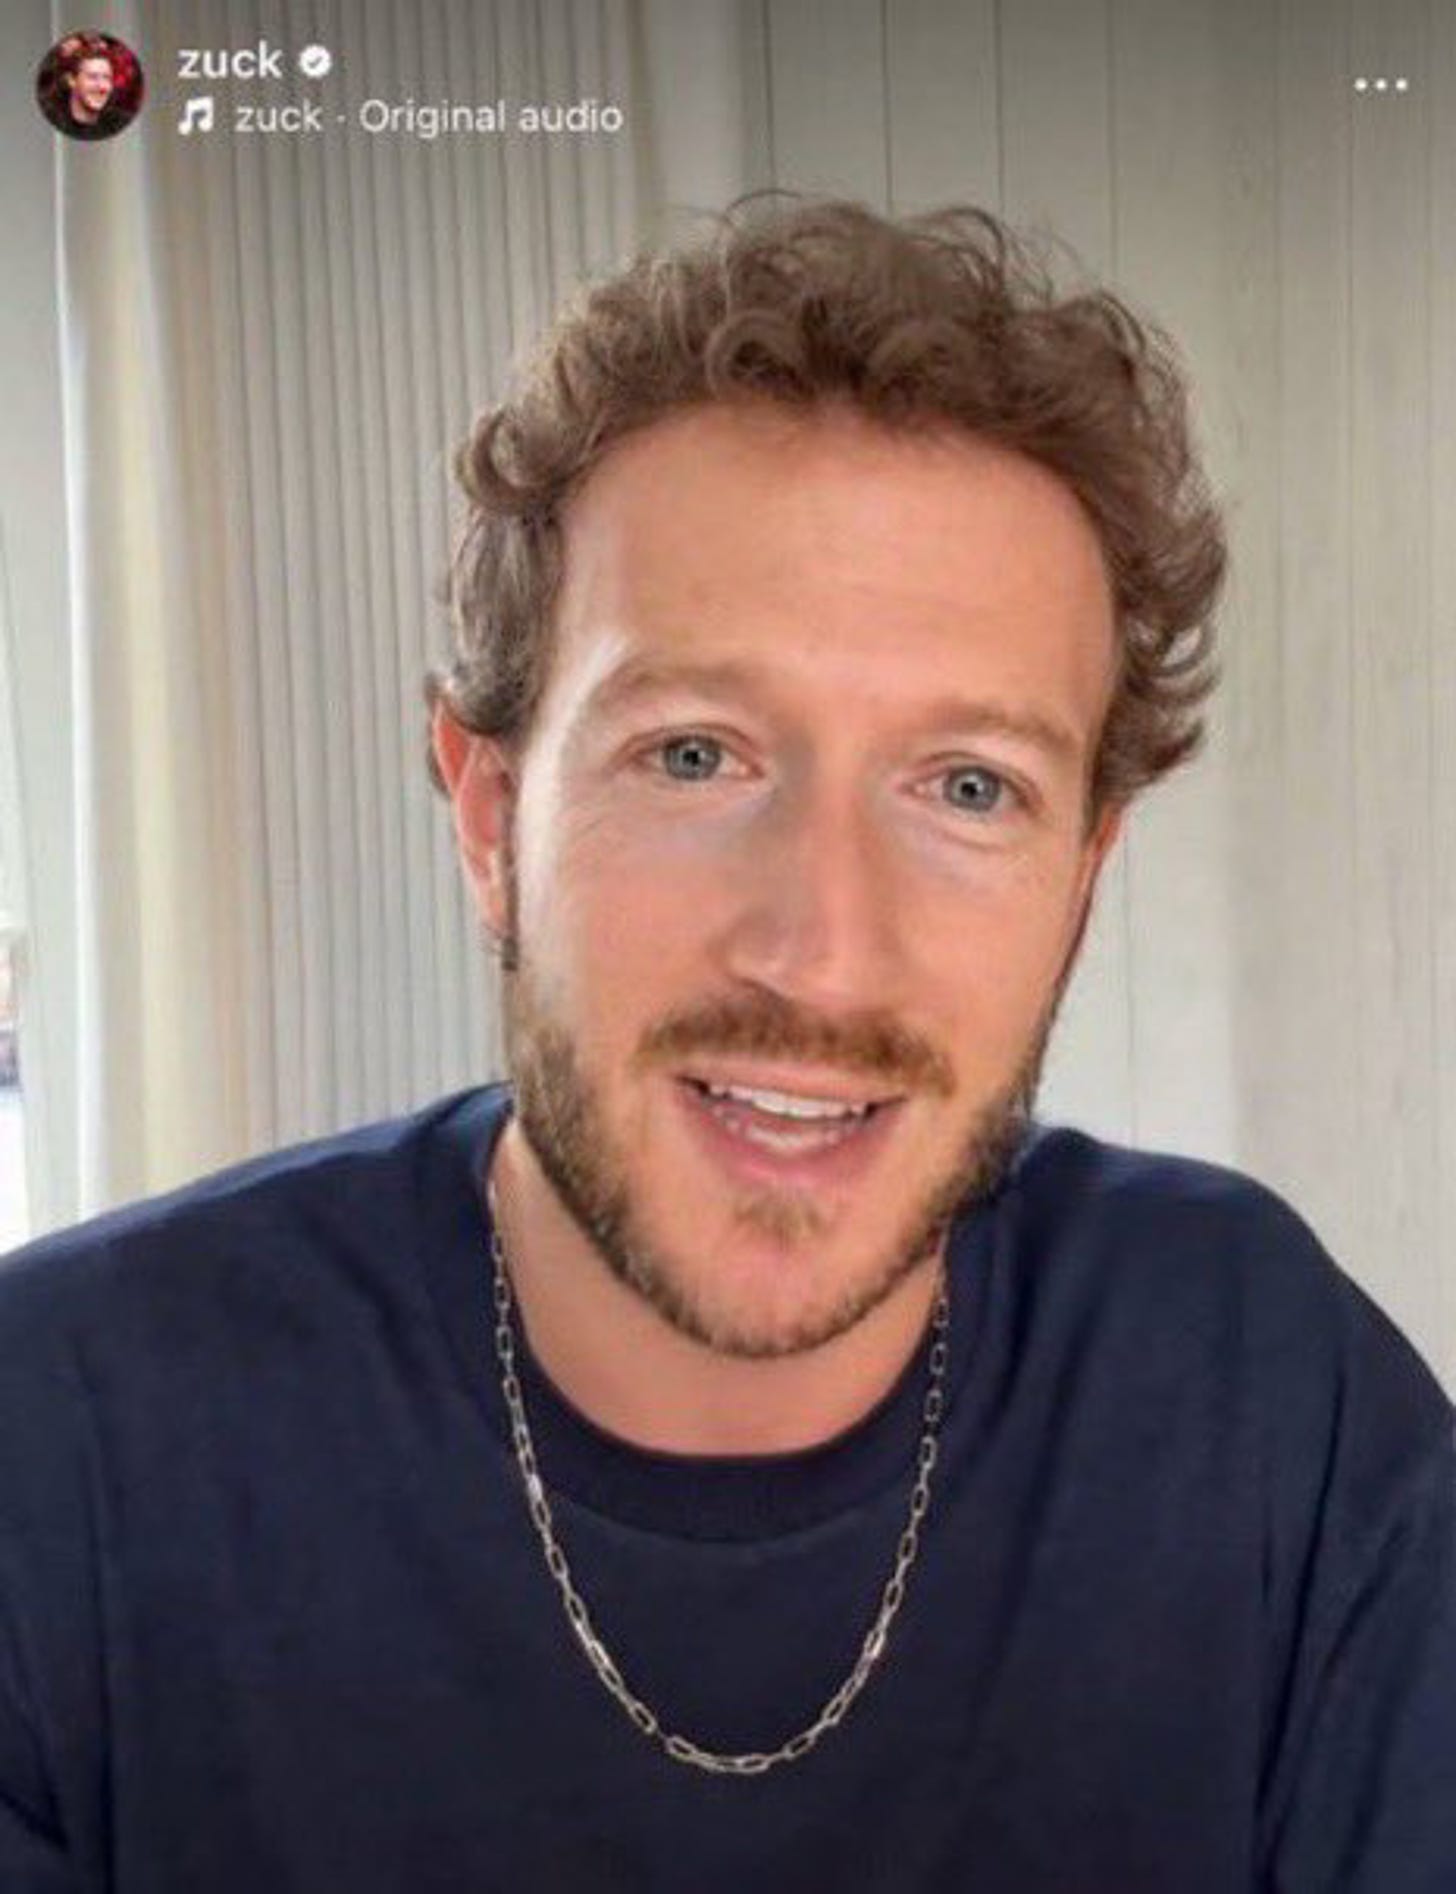 Fans thirst over Photoshopped picture of Mark Zuckerberg with a beard